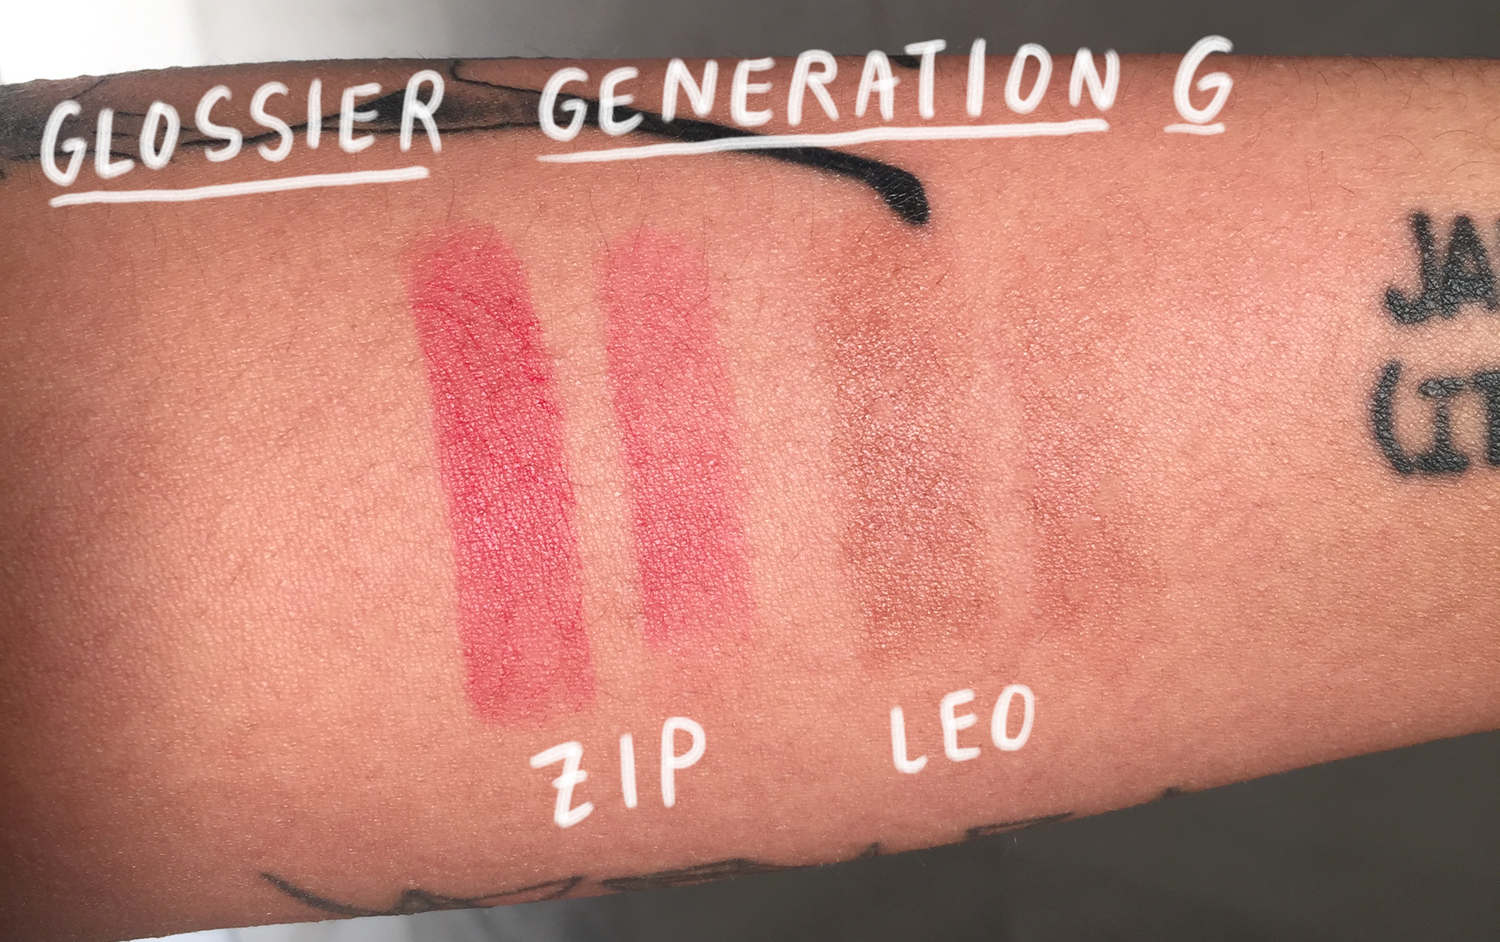 Alert spurv lufthavn Review | New Glossier Generation G Matte Lipstick in Leo and Zip and  Swatches —